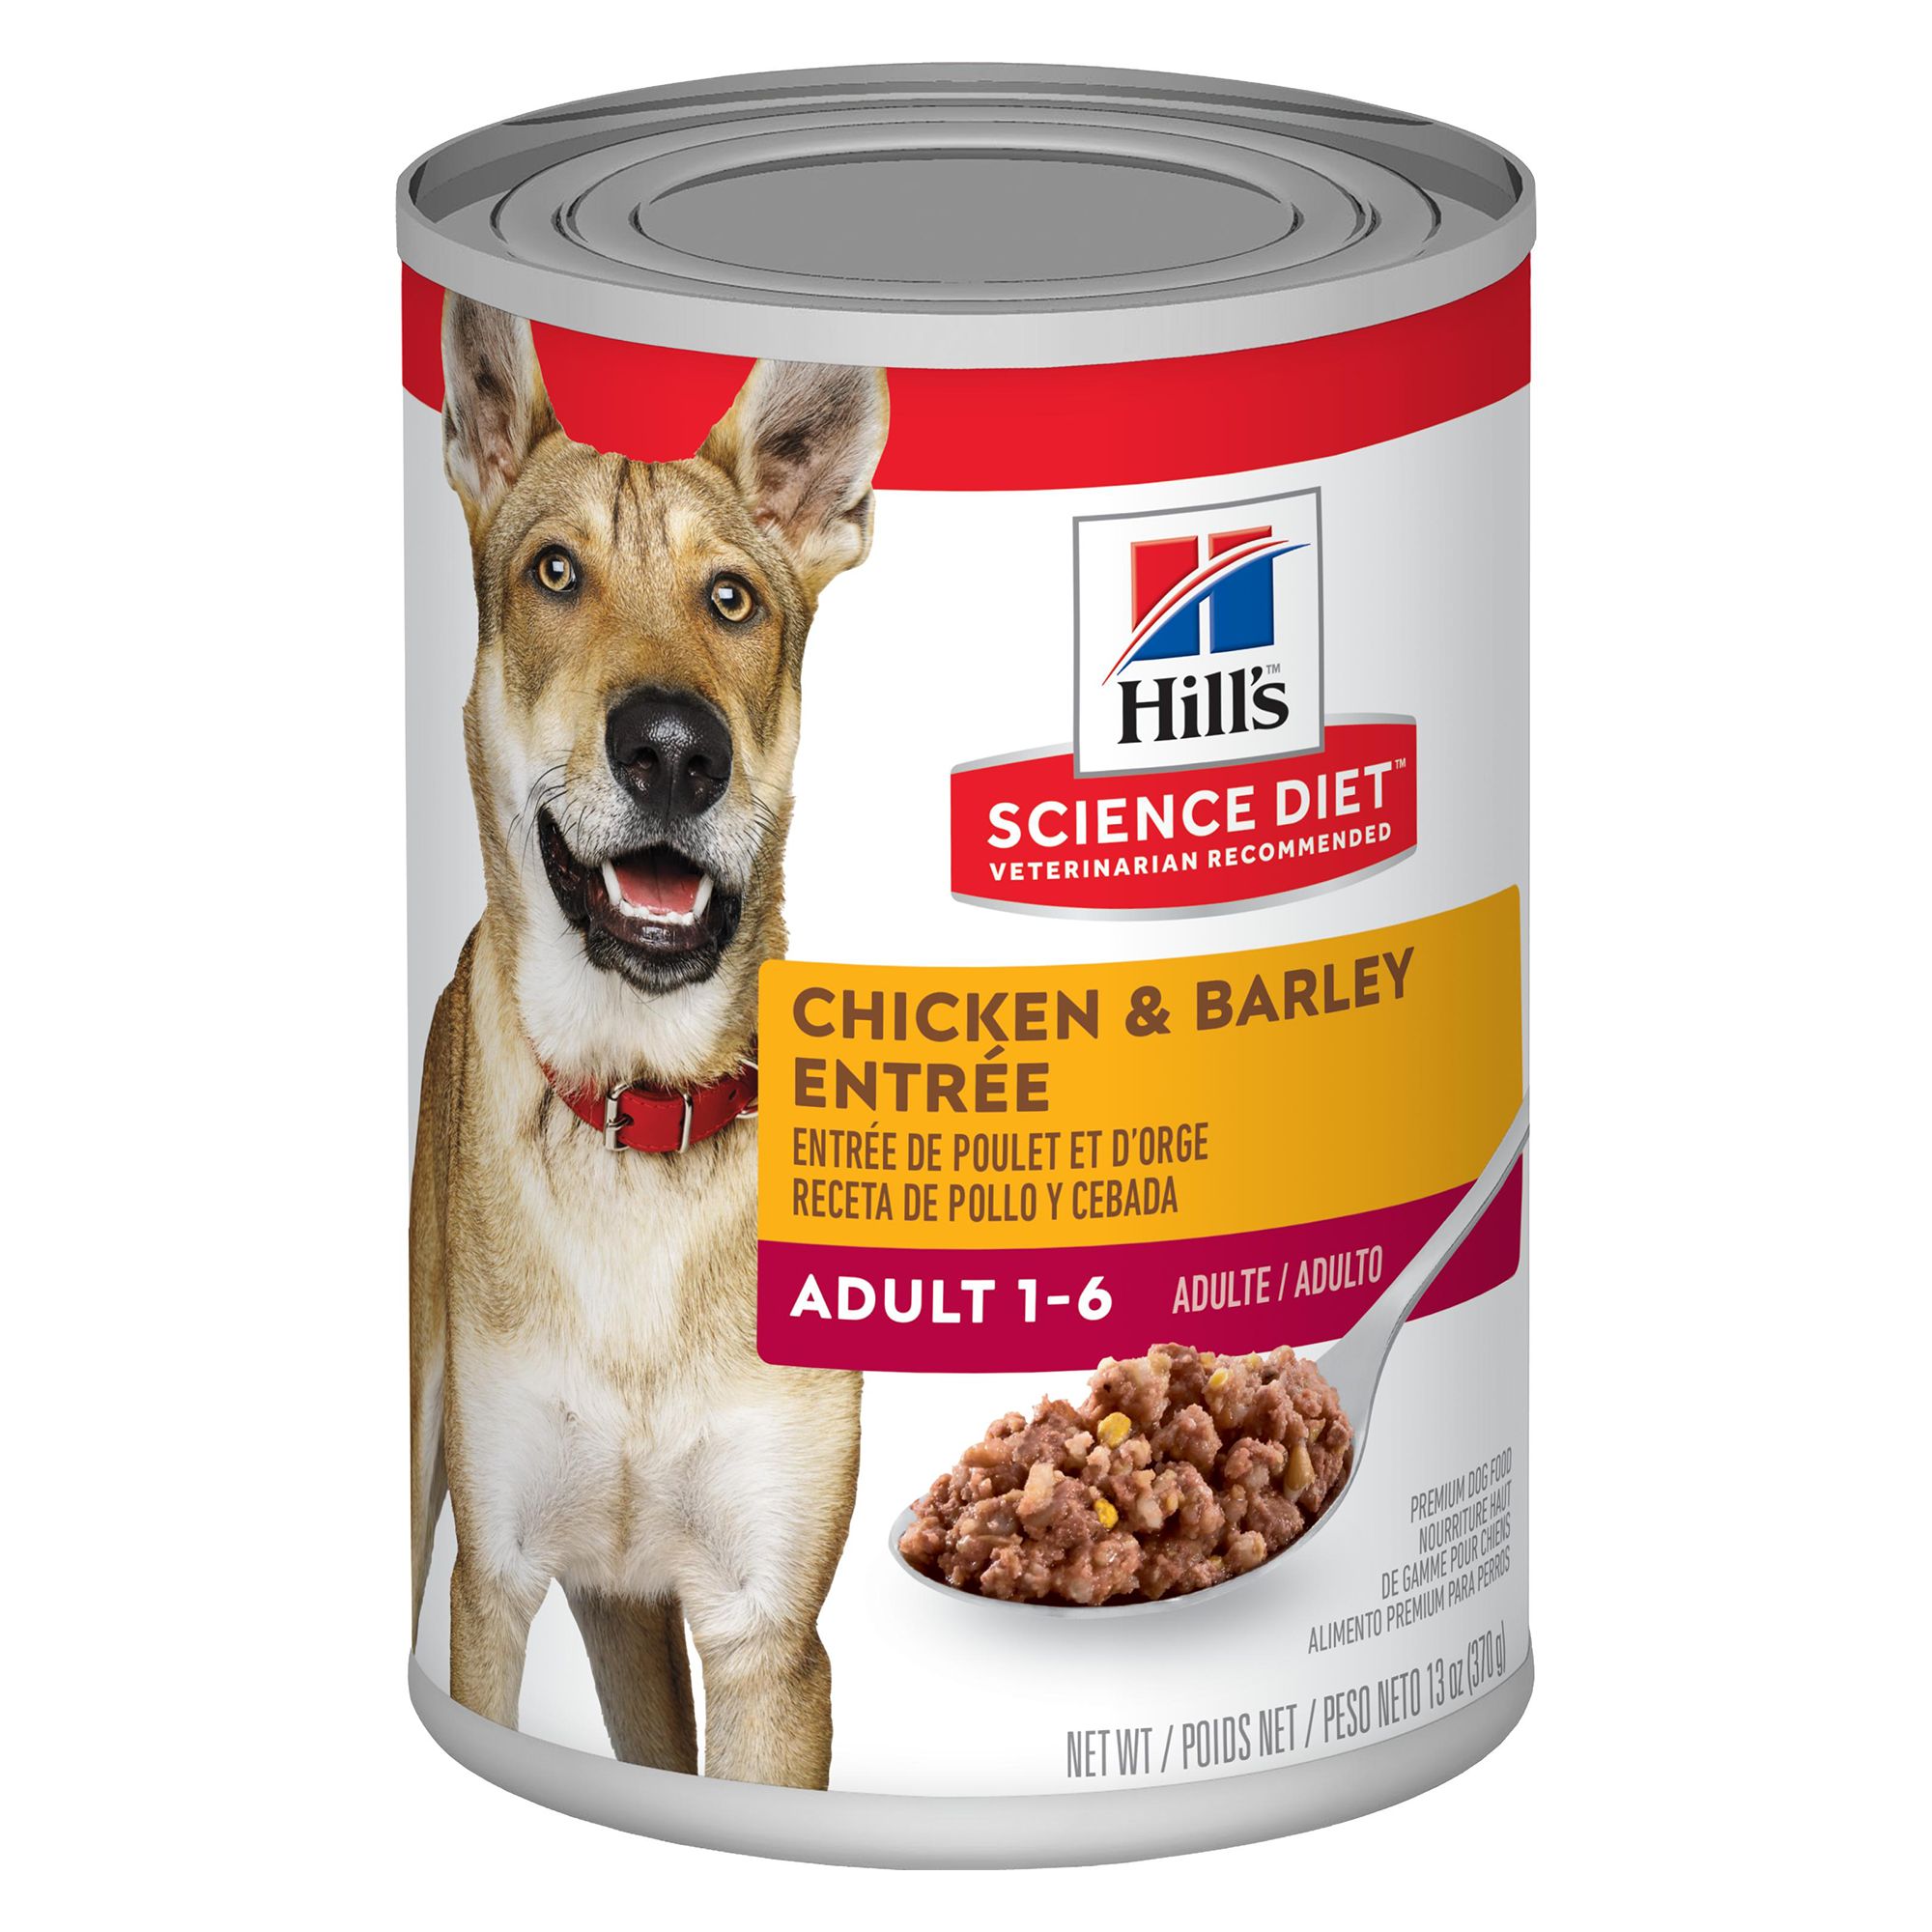 science hill dog food